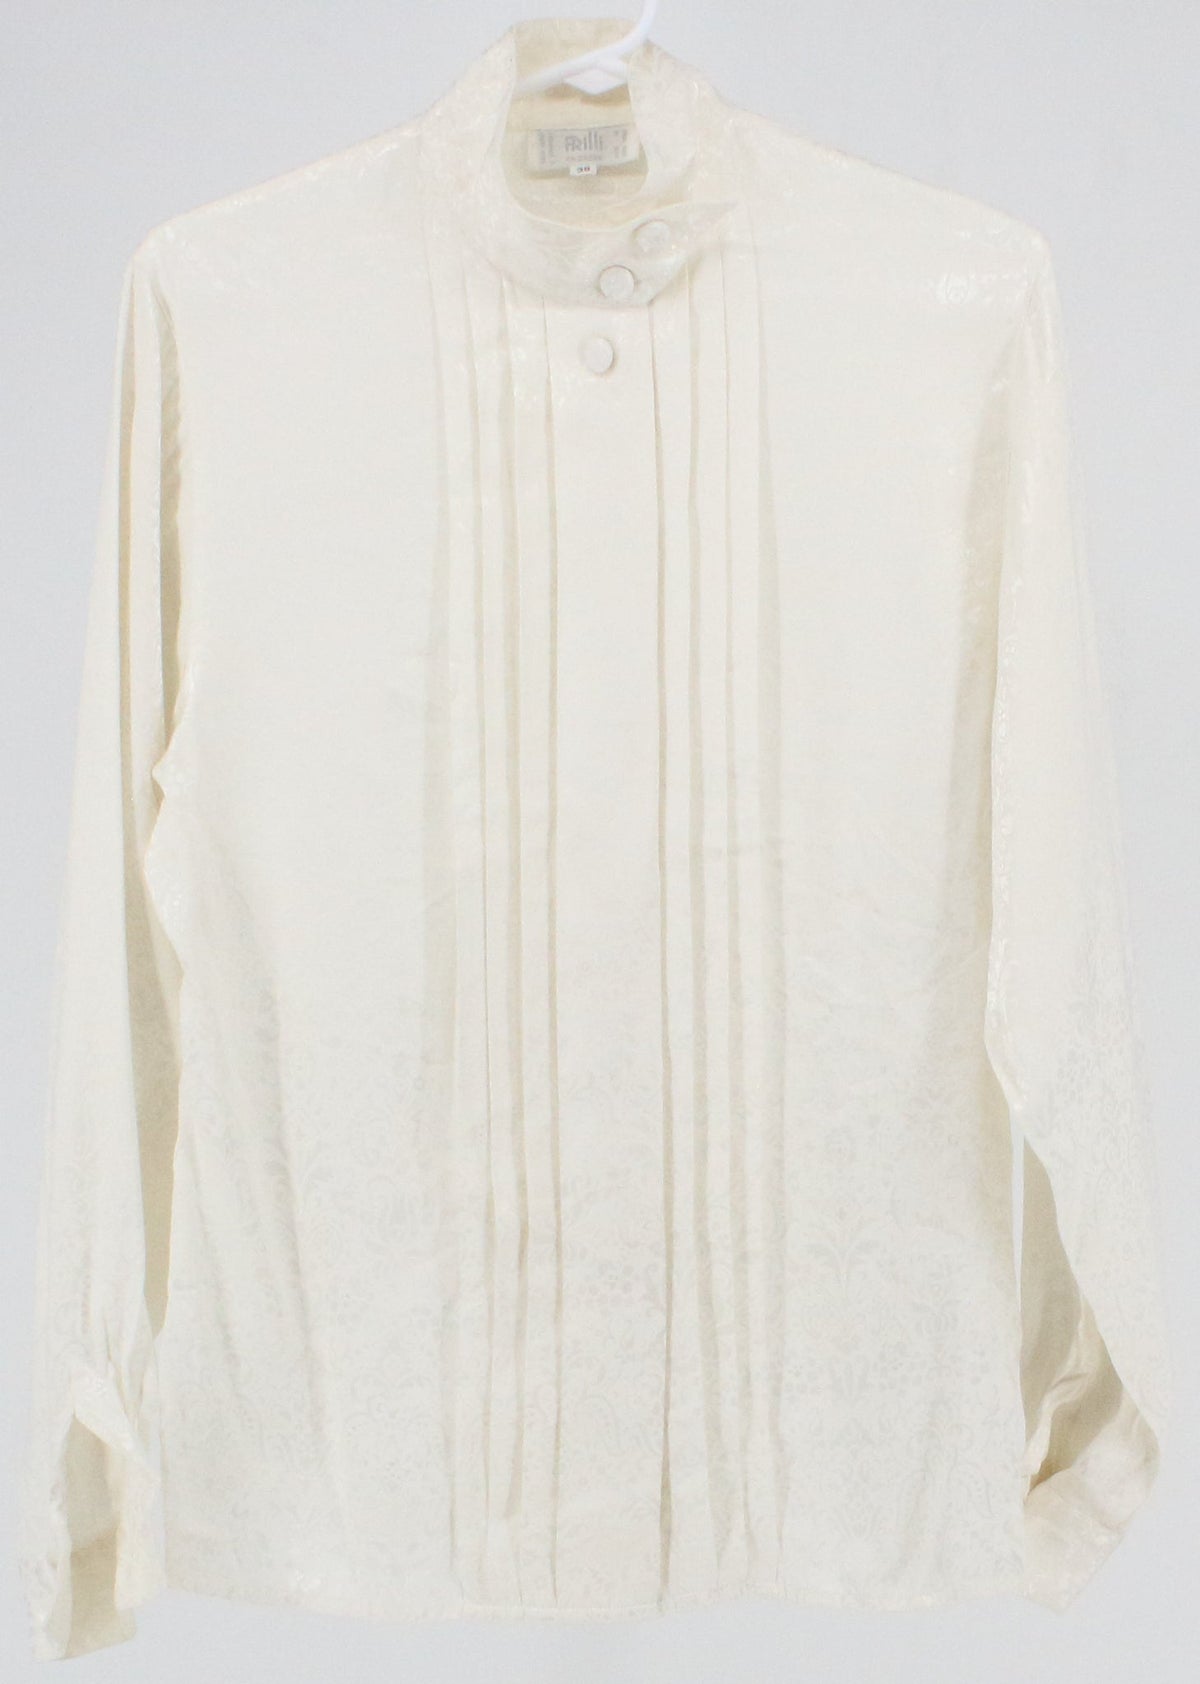 Frilli Off White Jacquard Front Pleated Blouse